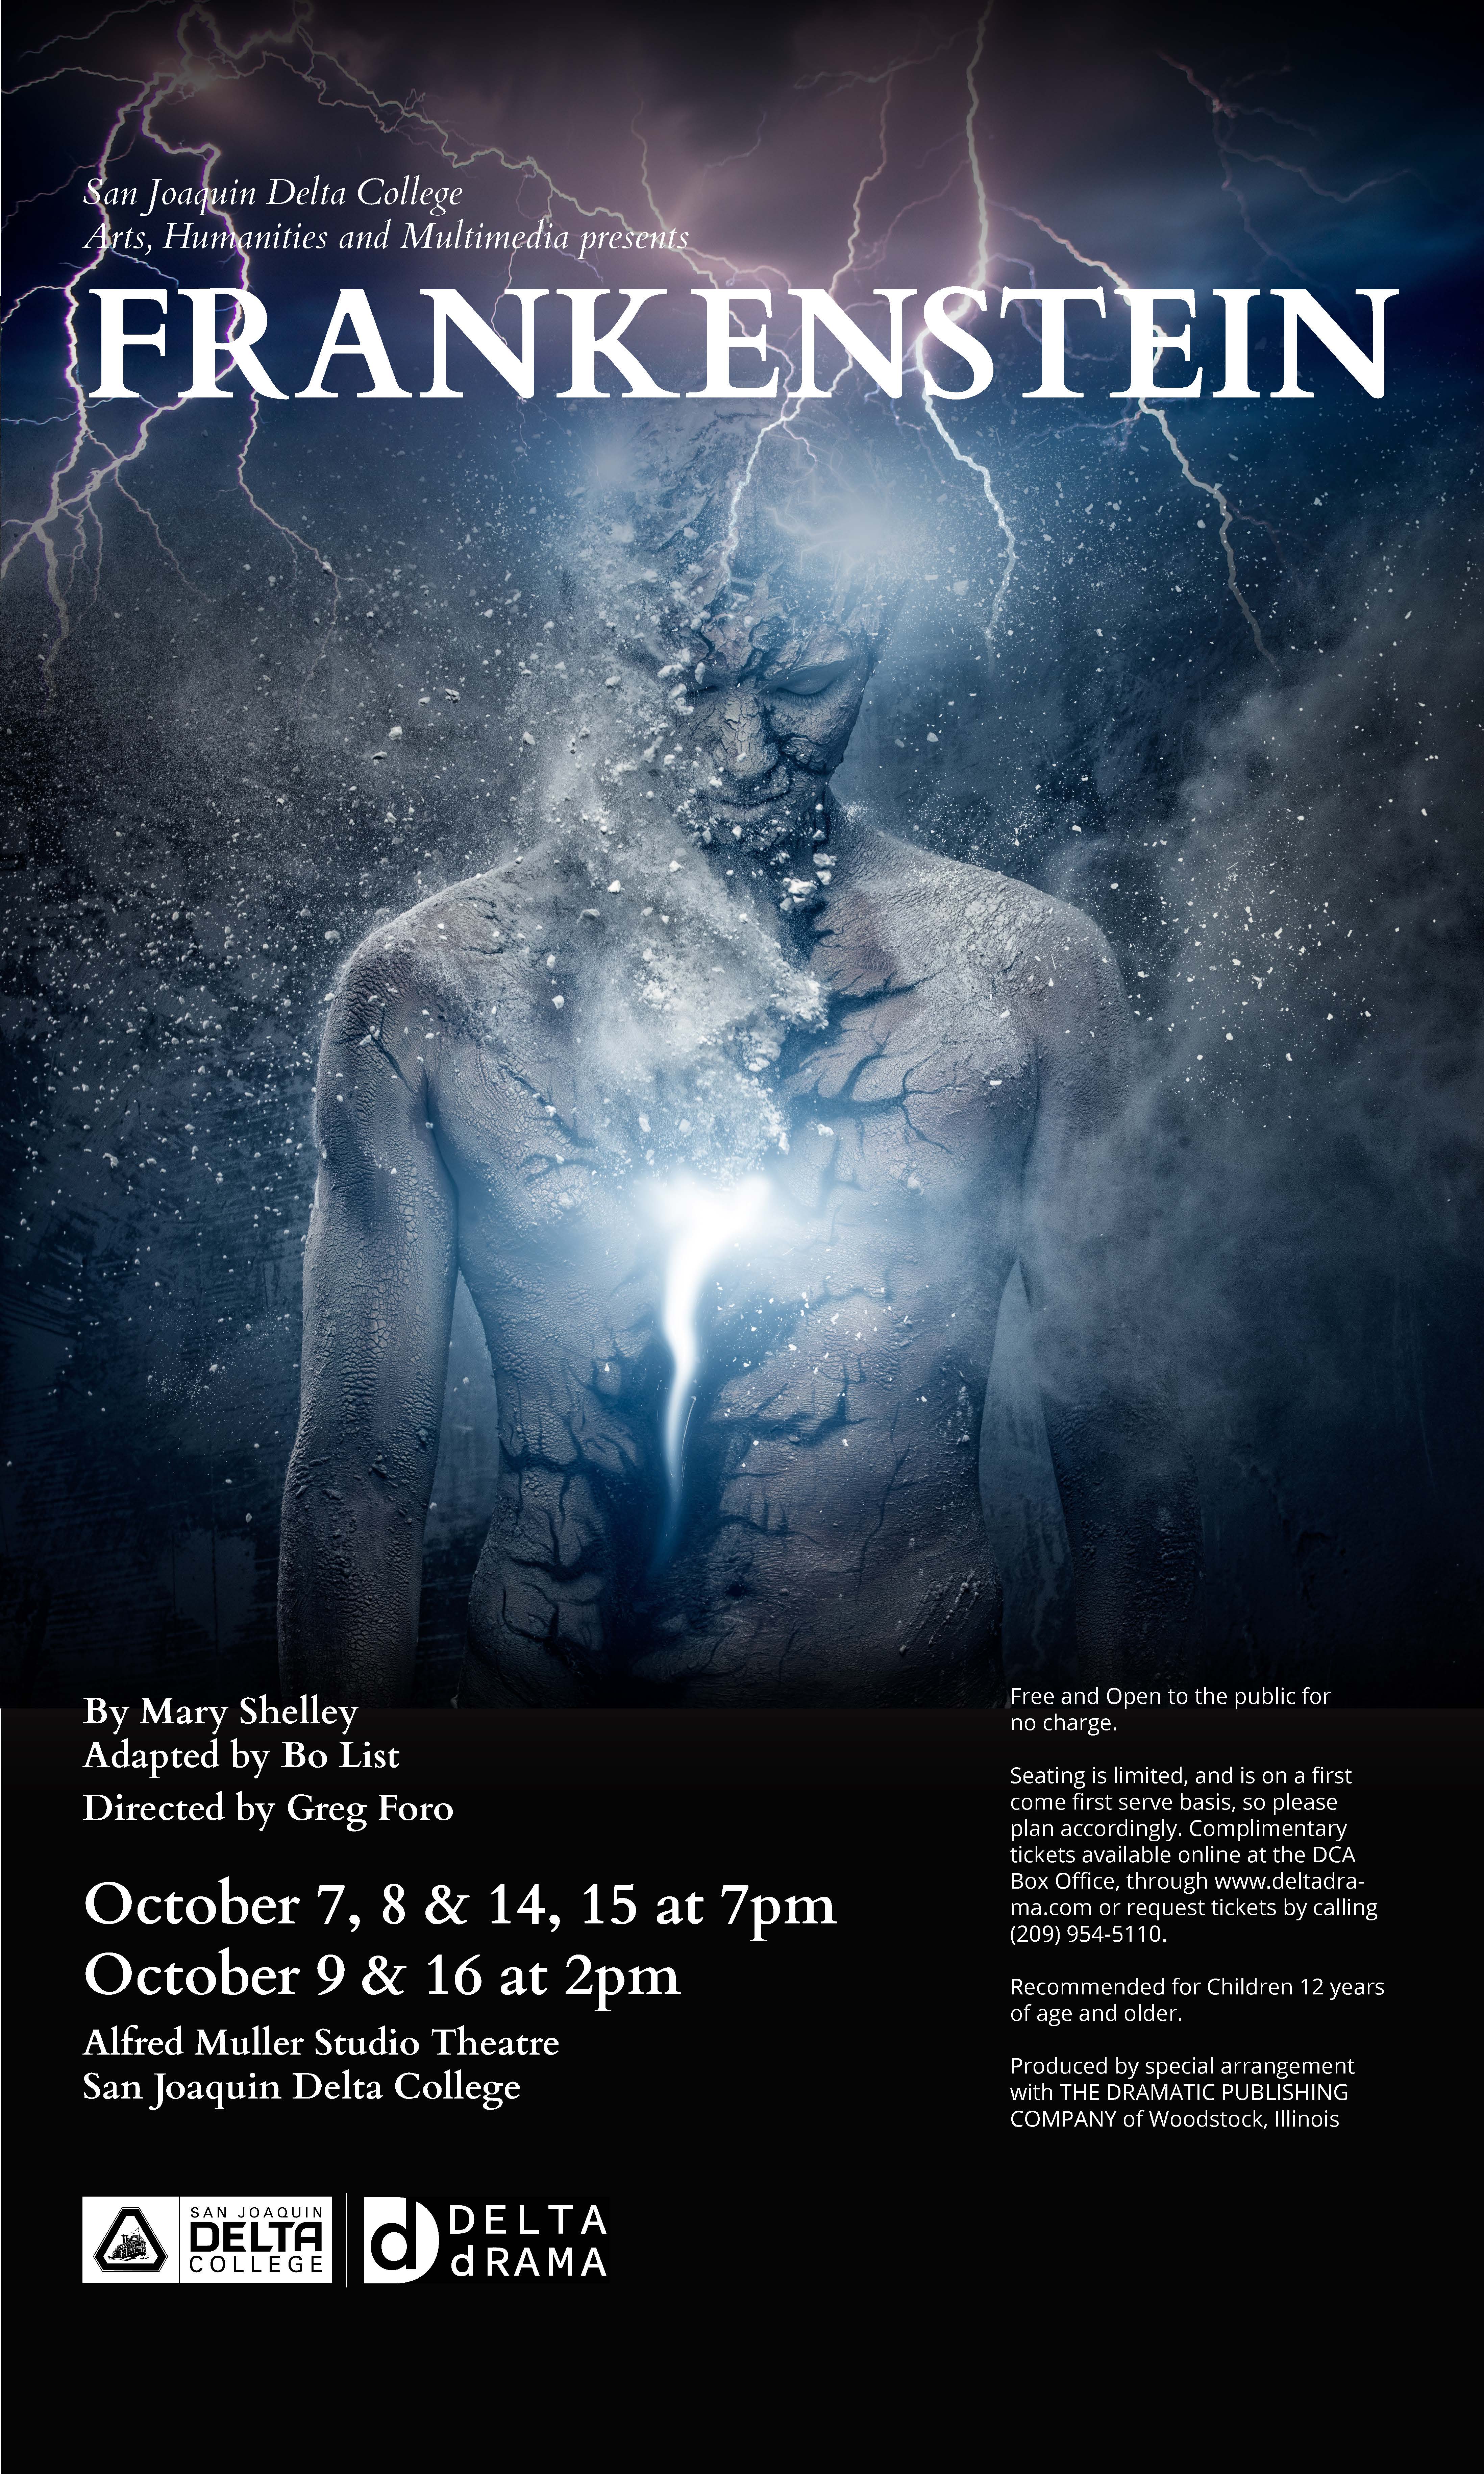 'Frankenstein' comes to the Delta College stage starting Oct. 7